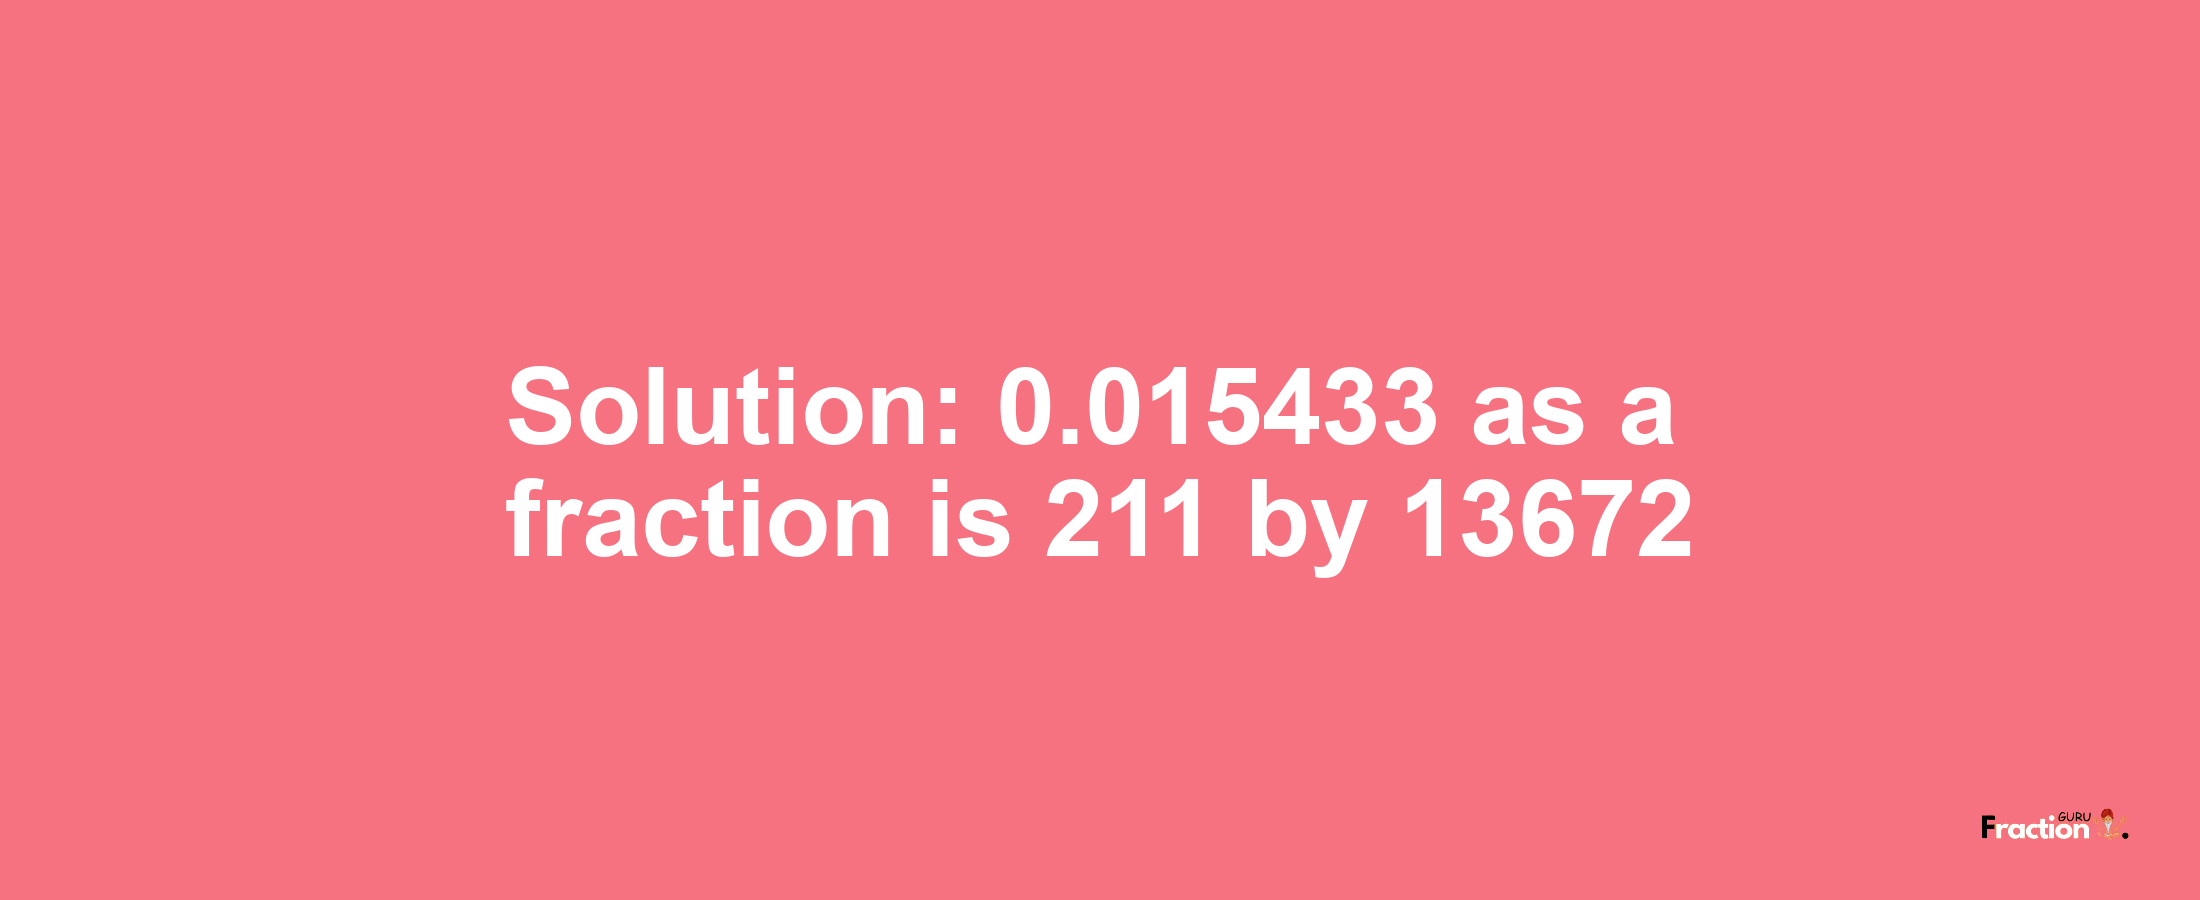 Solution:0.015433 as a fraction is 211/13672